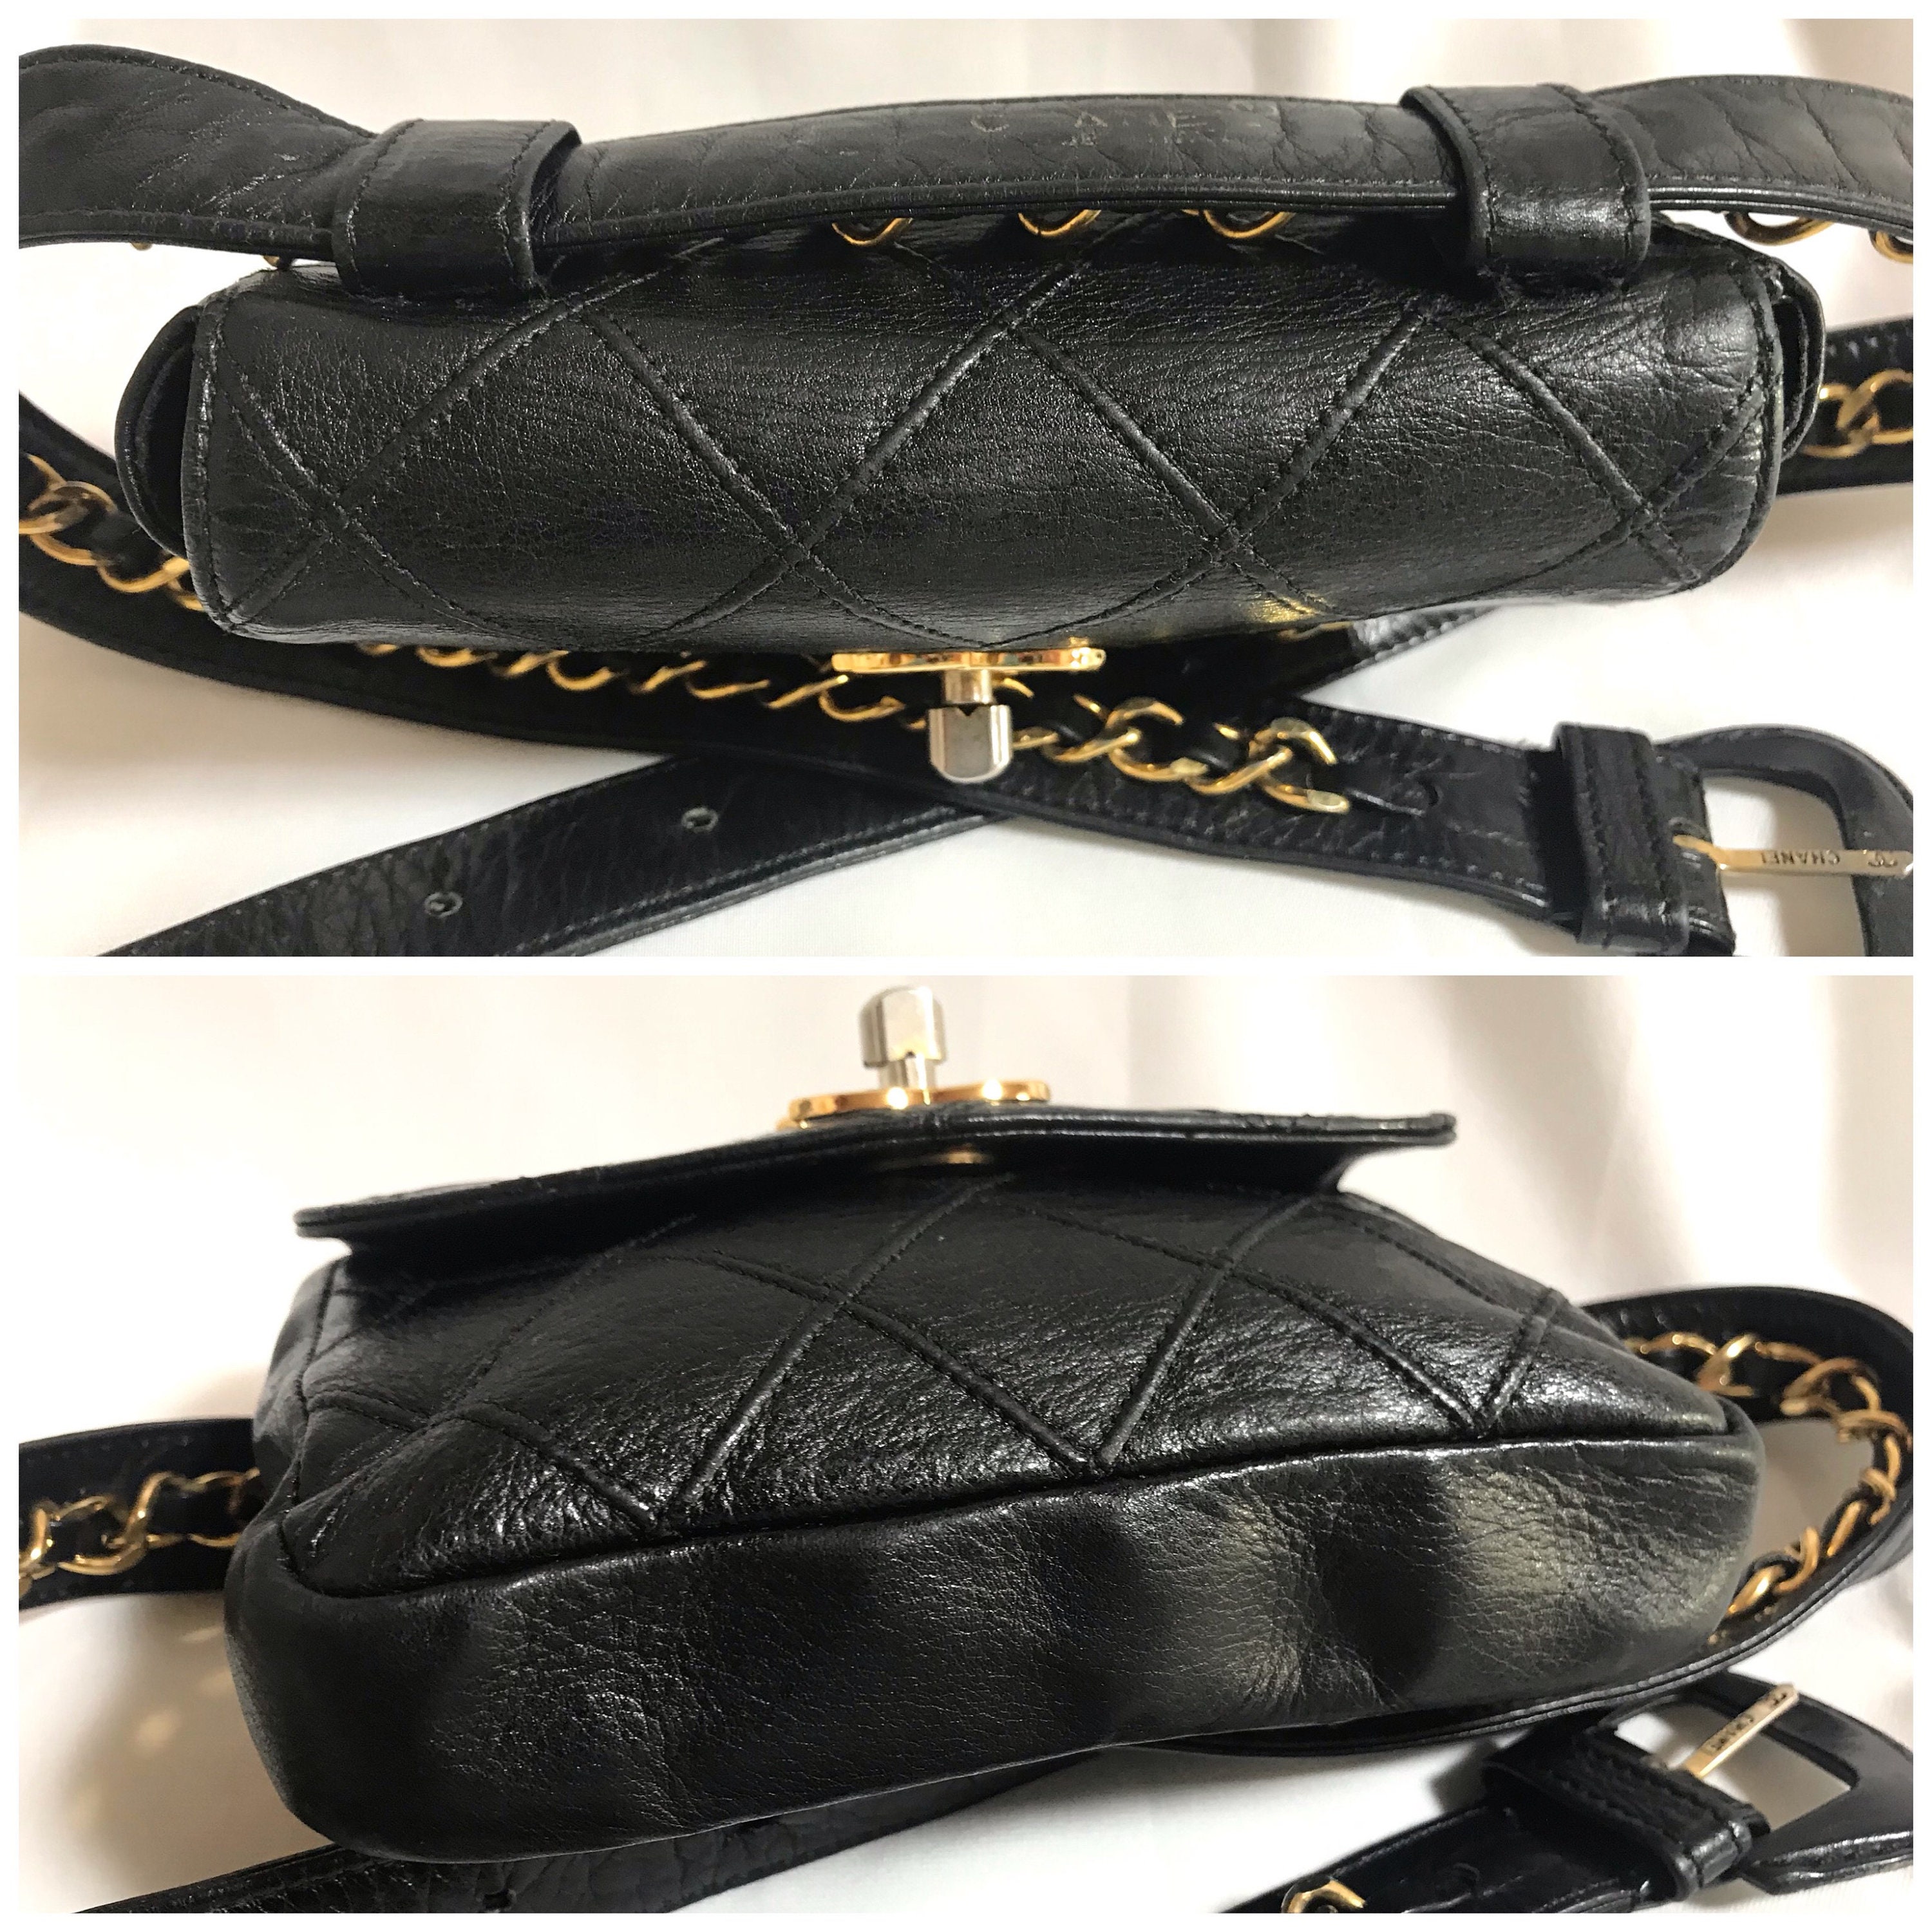 Chanel Vintage Black Leather Waist Purse, Fanny Pack With Golden Chain Belt  And Cc Closure Hock